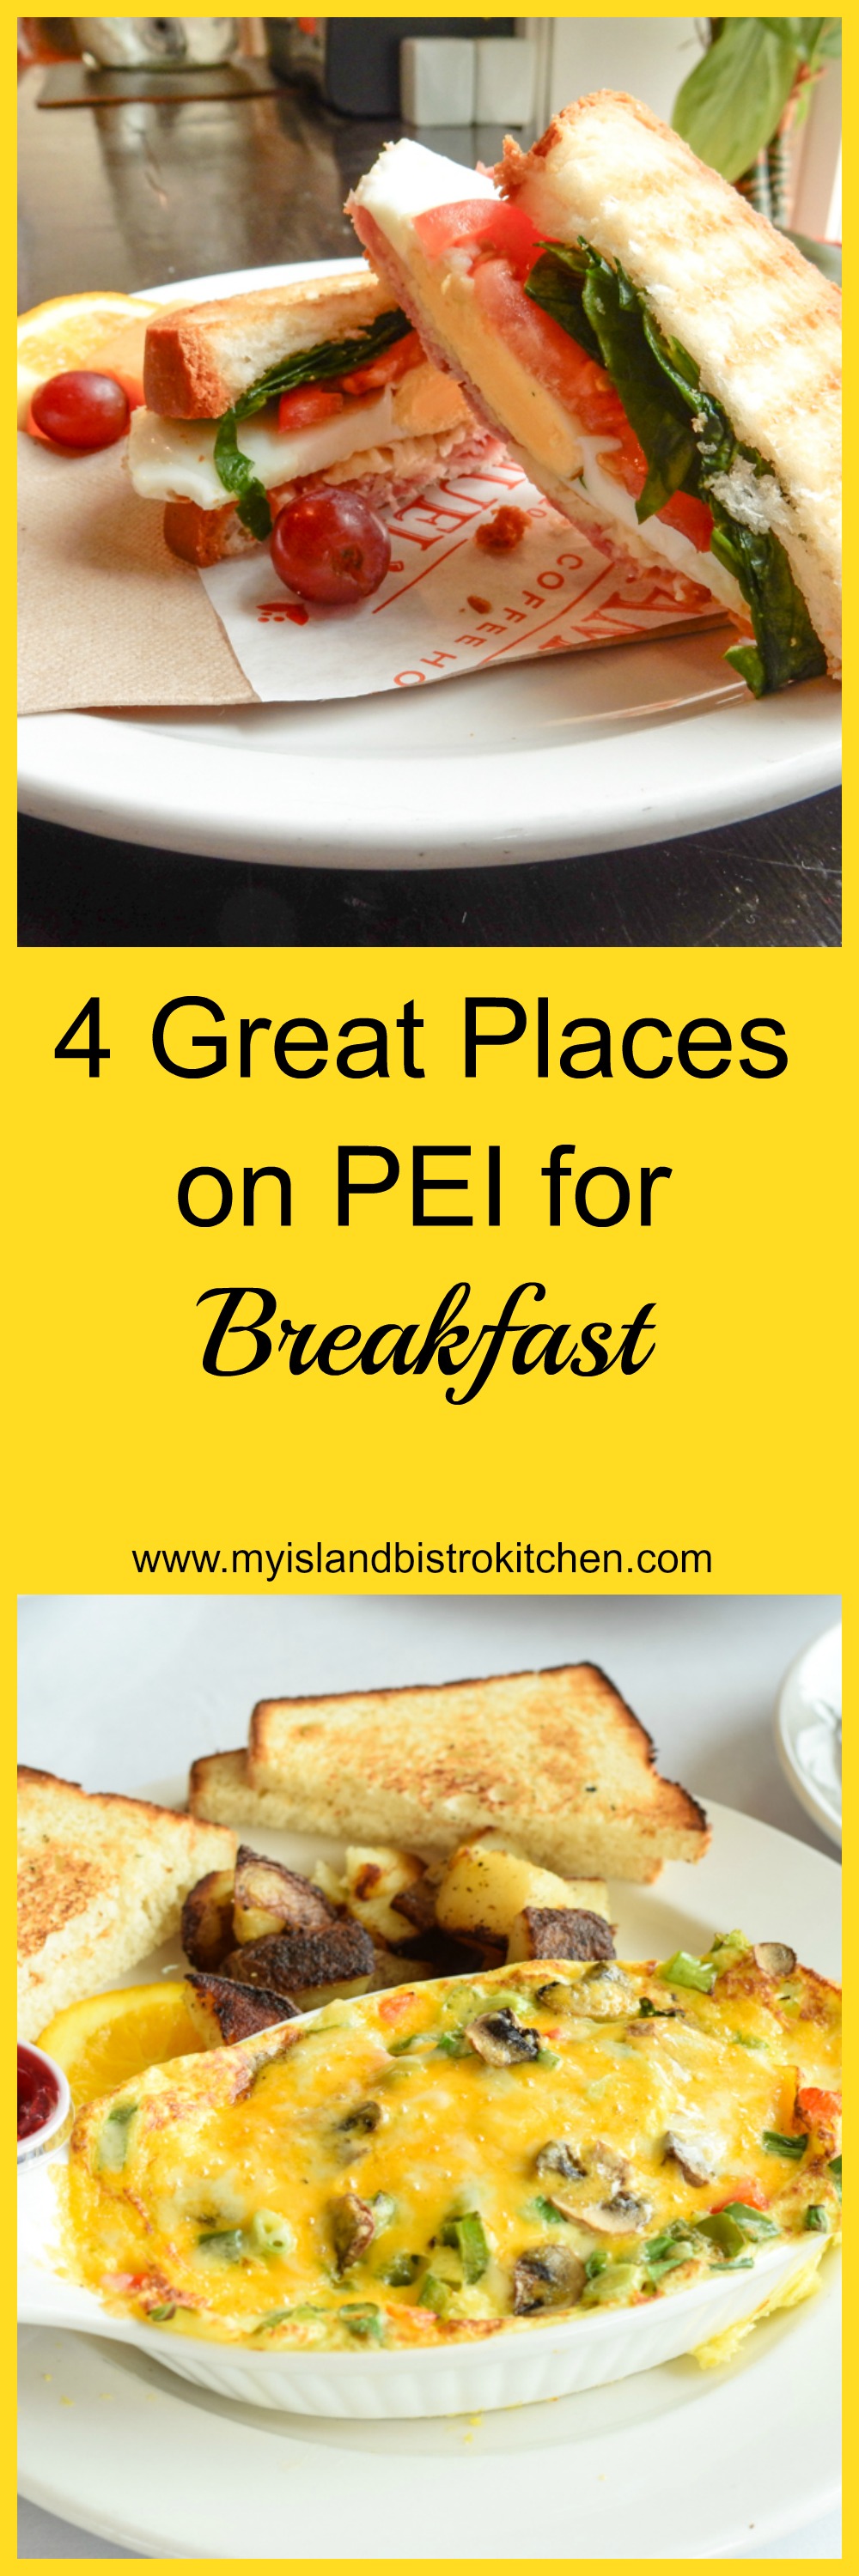 Four Great Places on PEI for Breakfast